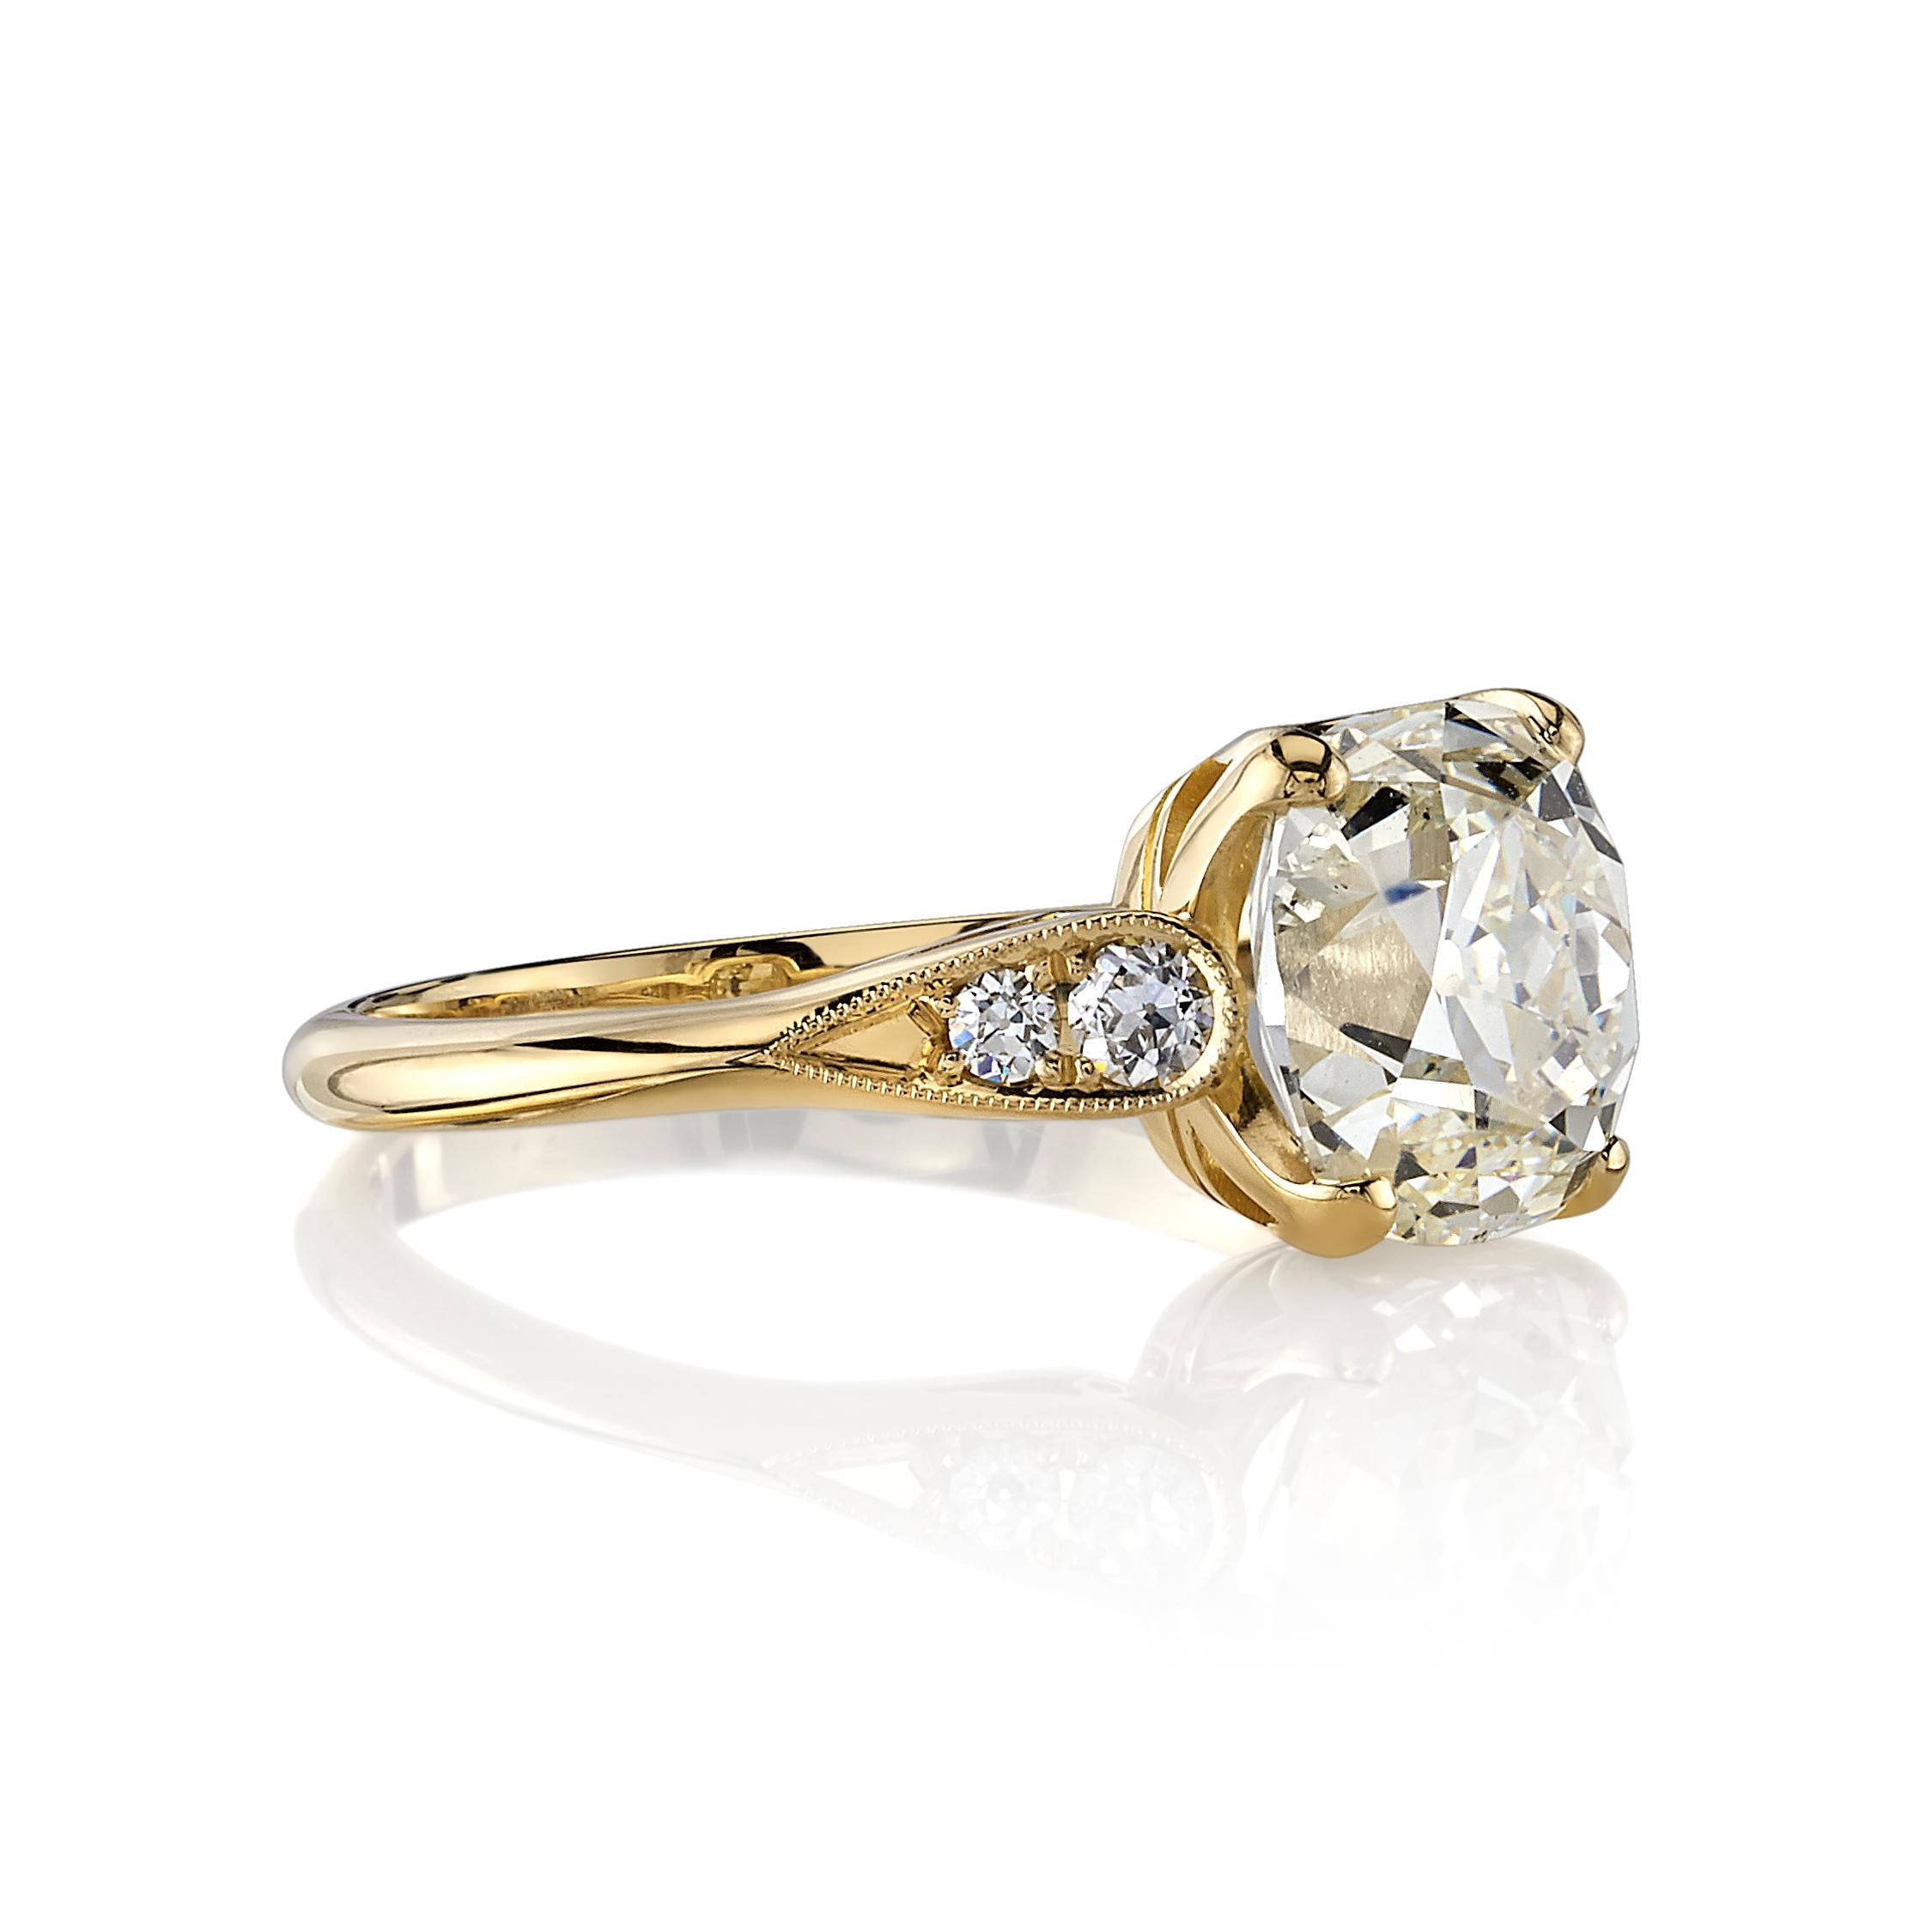 2.68ctw N/SI1 GIA certified Cushion cut diamond with 0.14ctw accent diamonds set in a handcrafted 18K yellow gold ring.

Ring is currently a size 6 and can be sized to fit.

Our jewelry is made locally in Los Angeles and most pieces are made to